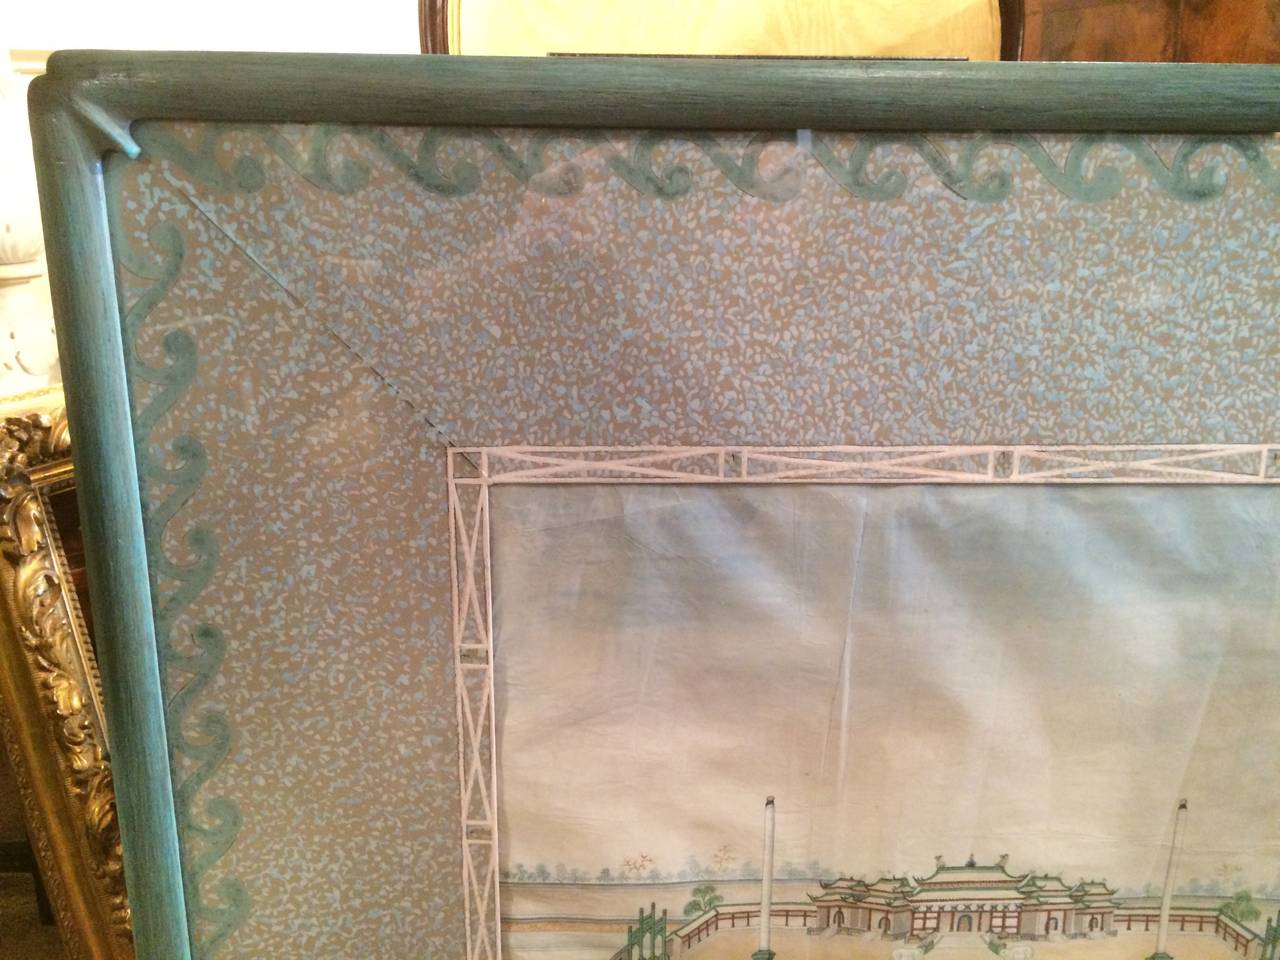 Chinese Export Watercolors in Mid-Century Frames 2